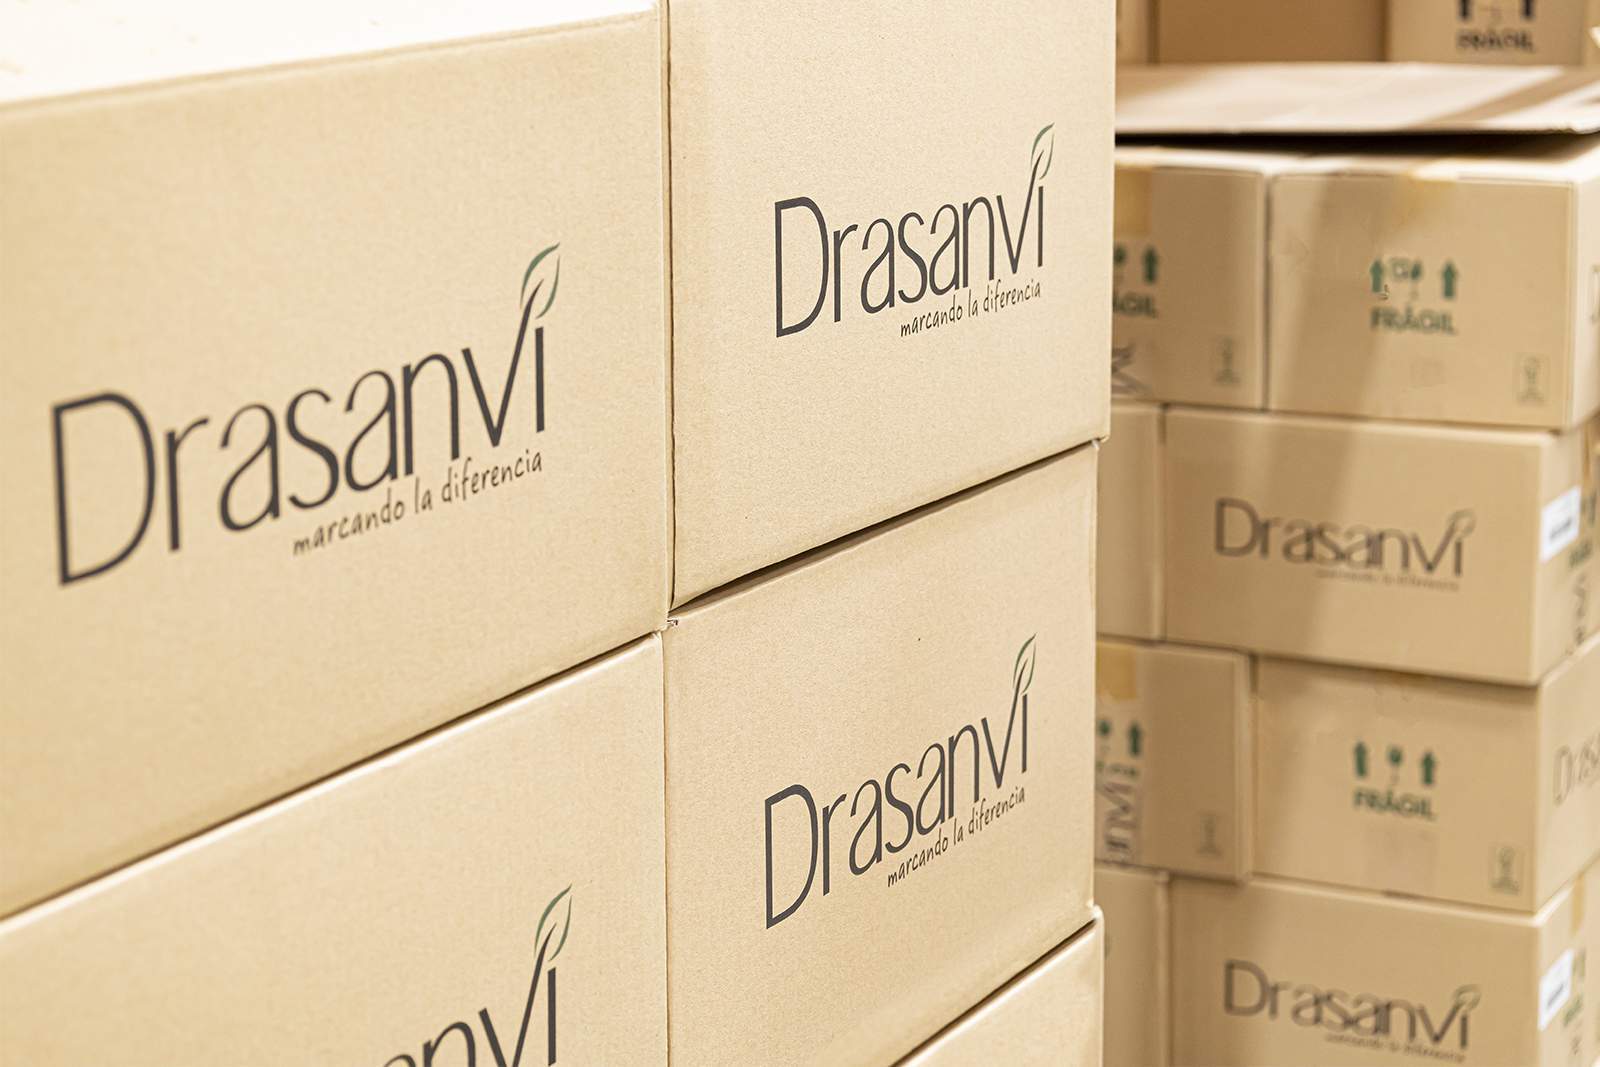 The distribution boxes are made of raw cardboard with gummed paper and recycled tape.